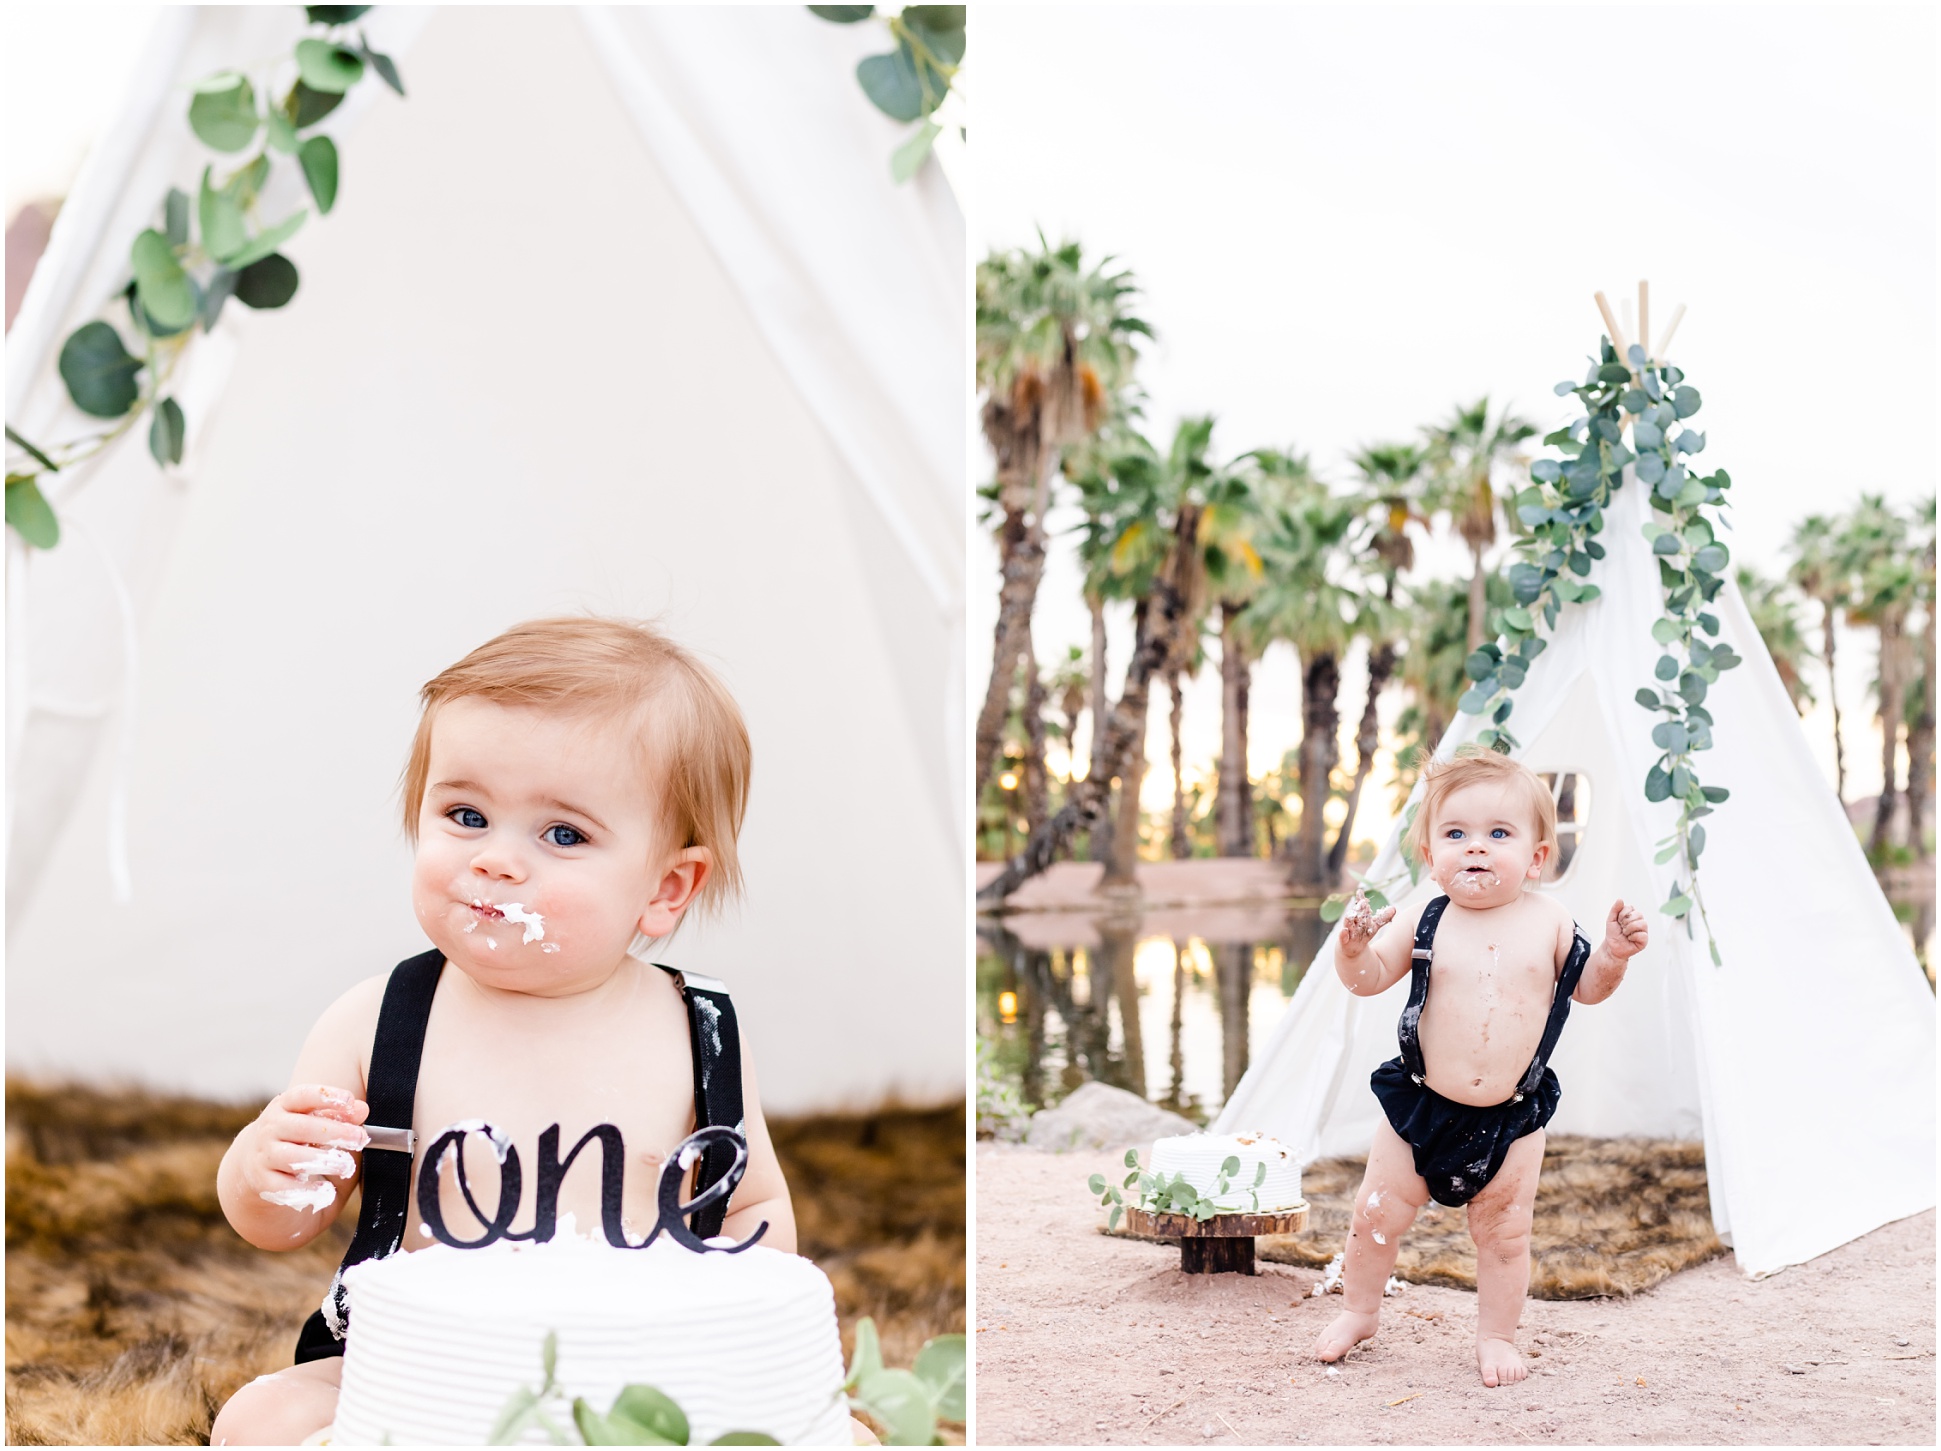 Left: Karsyn eating his first cake; Right: Karsyn covered in cake at Papago Park